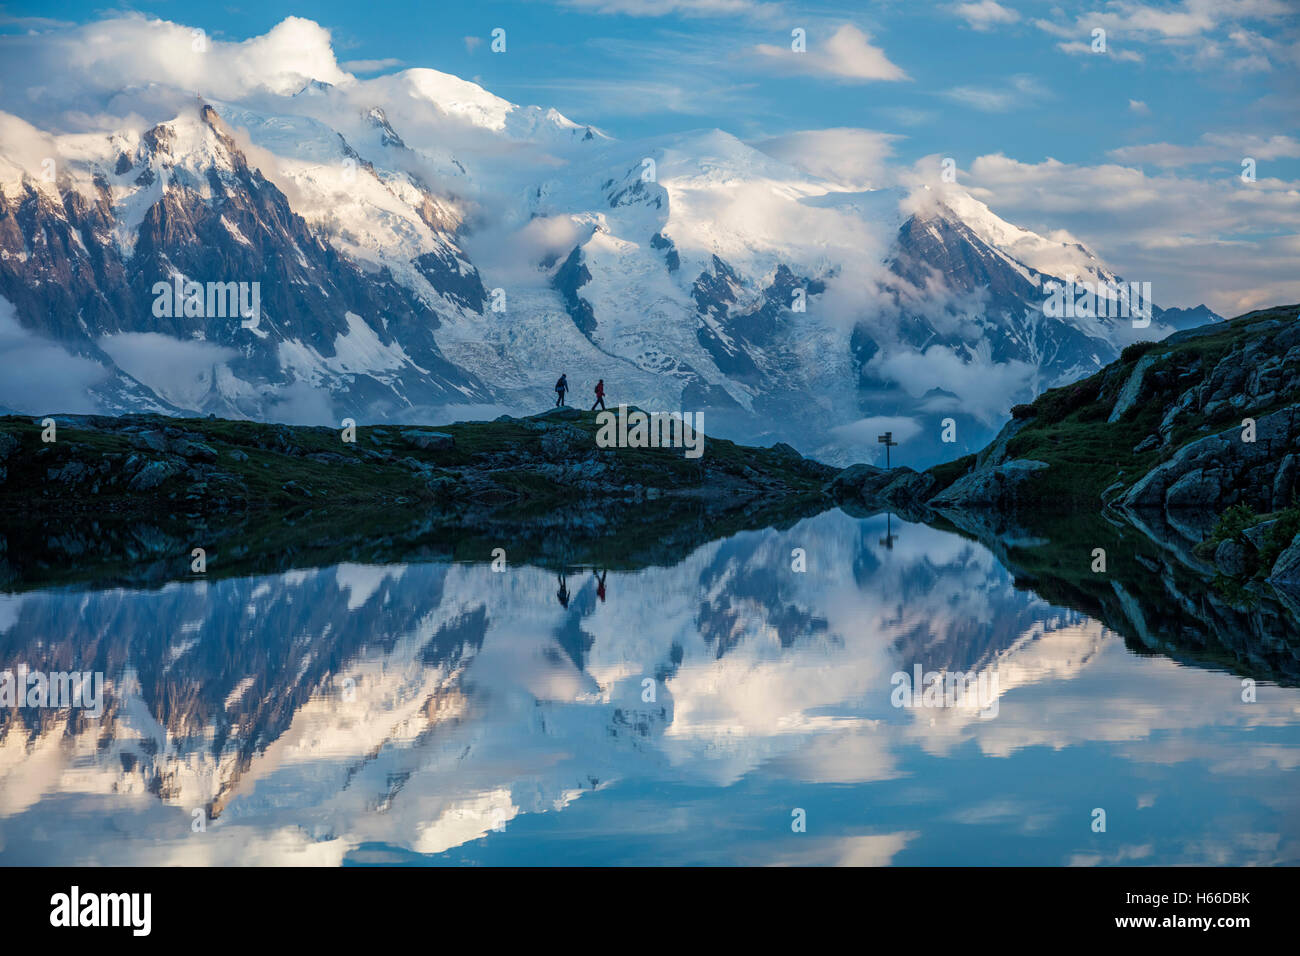 Hikers and the Mont Blanc massif reflected in Lac des Cheserys. Chamonix Valley, French Alps, France. Stock Photo